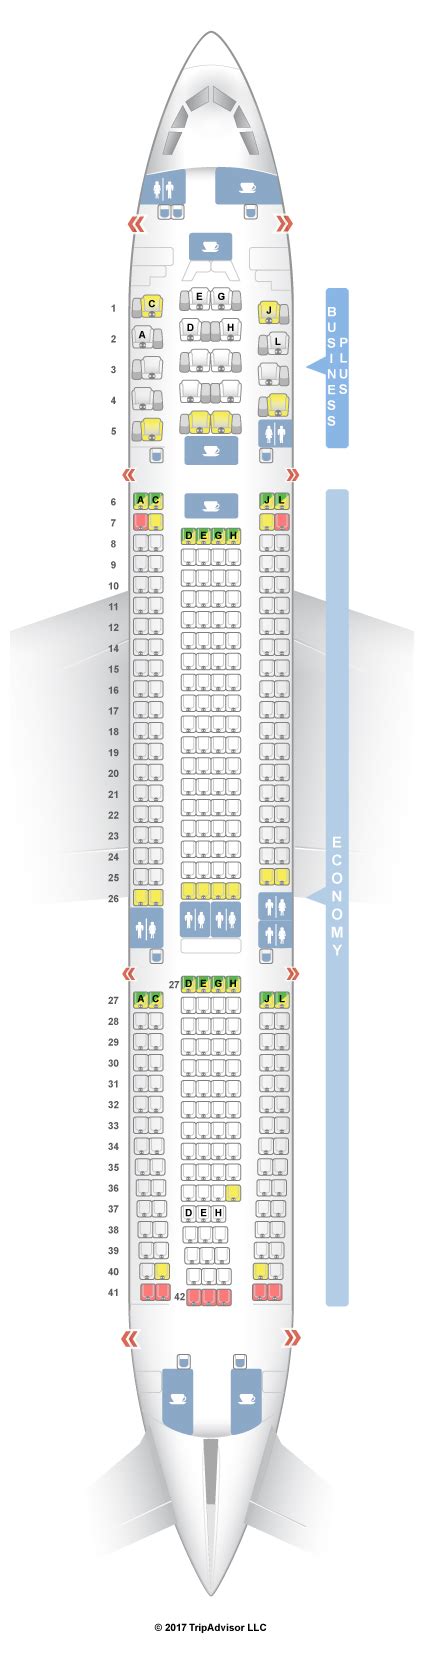 Iberia Airlines Seat Selection